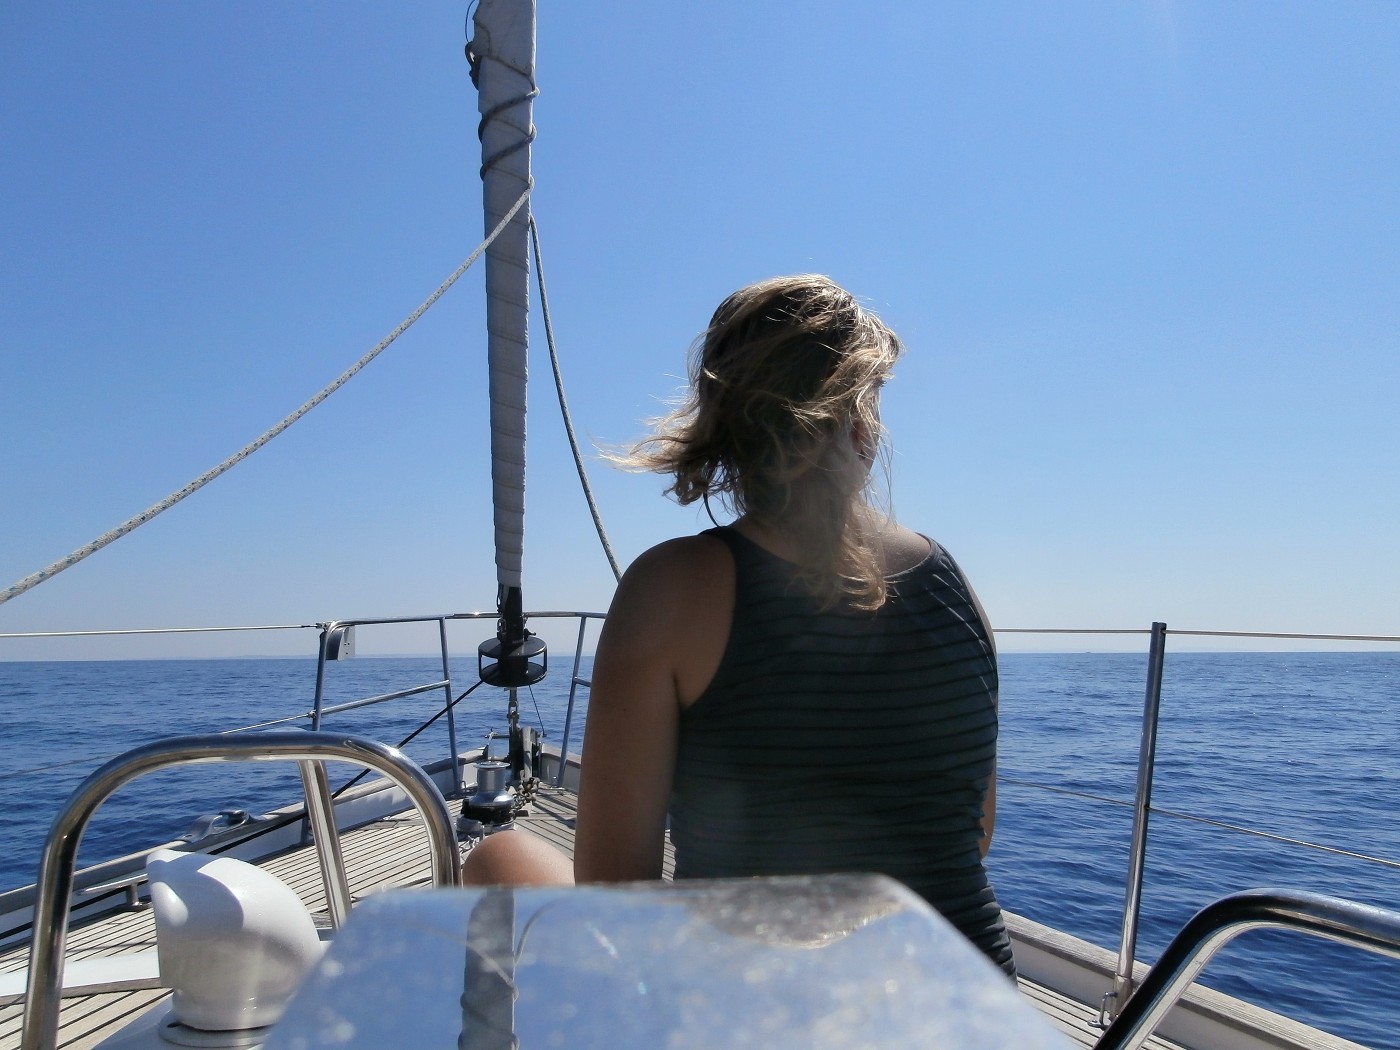 yacht hitchhiking a sailing boat from corfu greece to valletta malta hitchsailing boathitching dockwalking